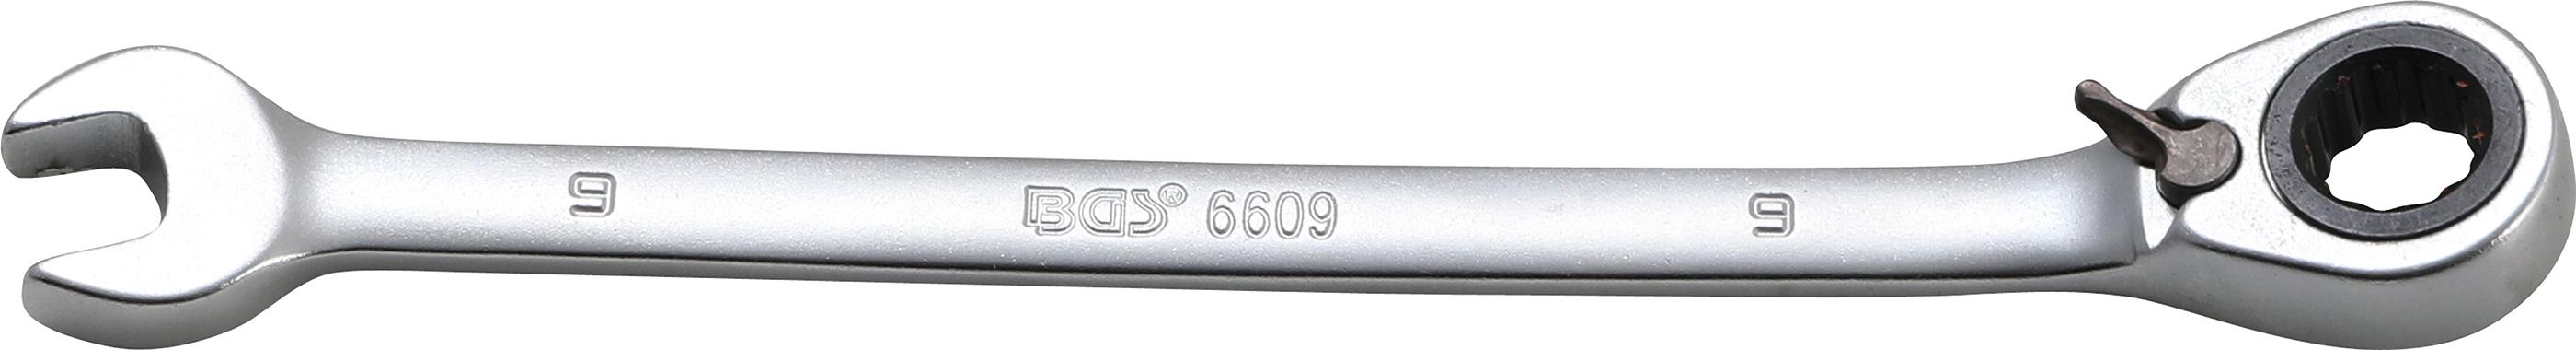 Ratchet Combination Wrench | reversible | 9 mm (6609)